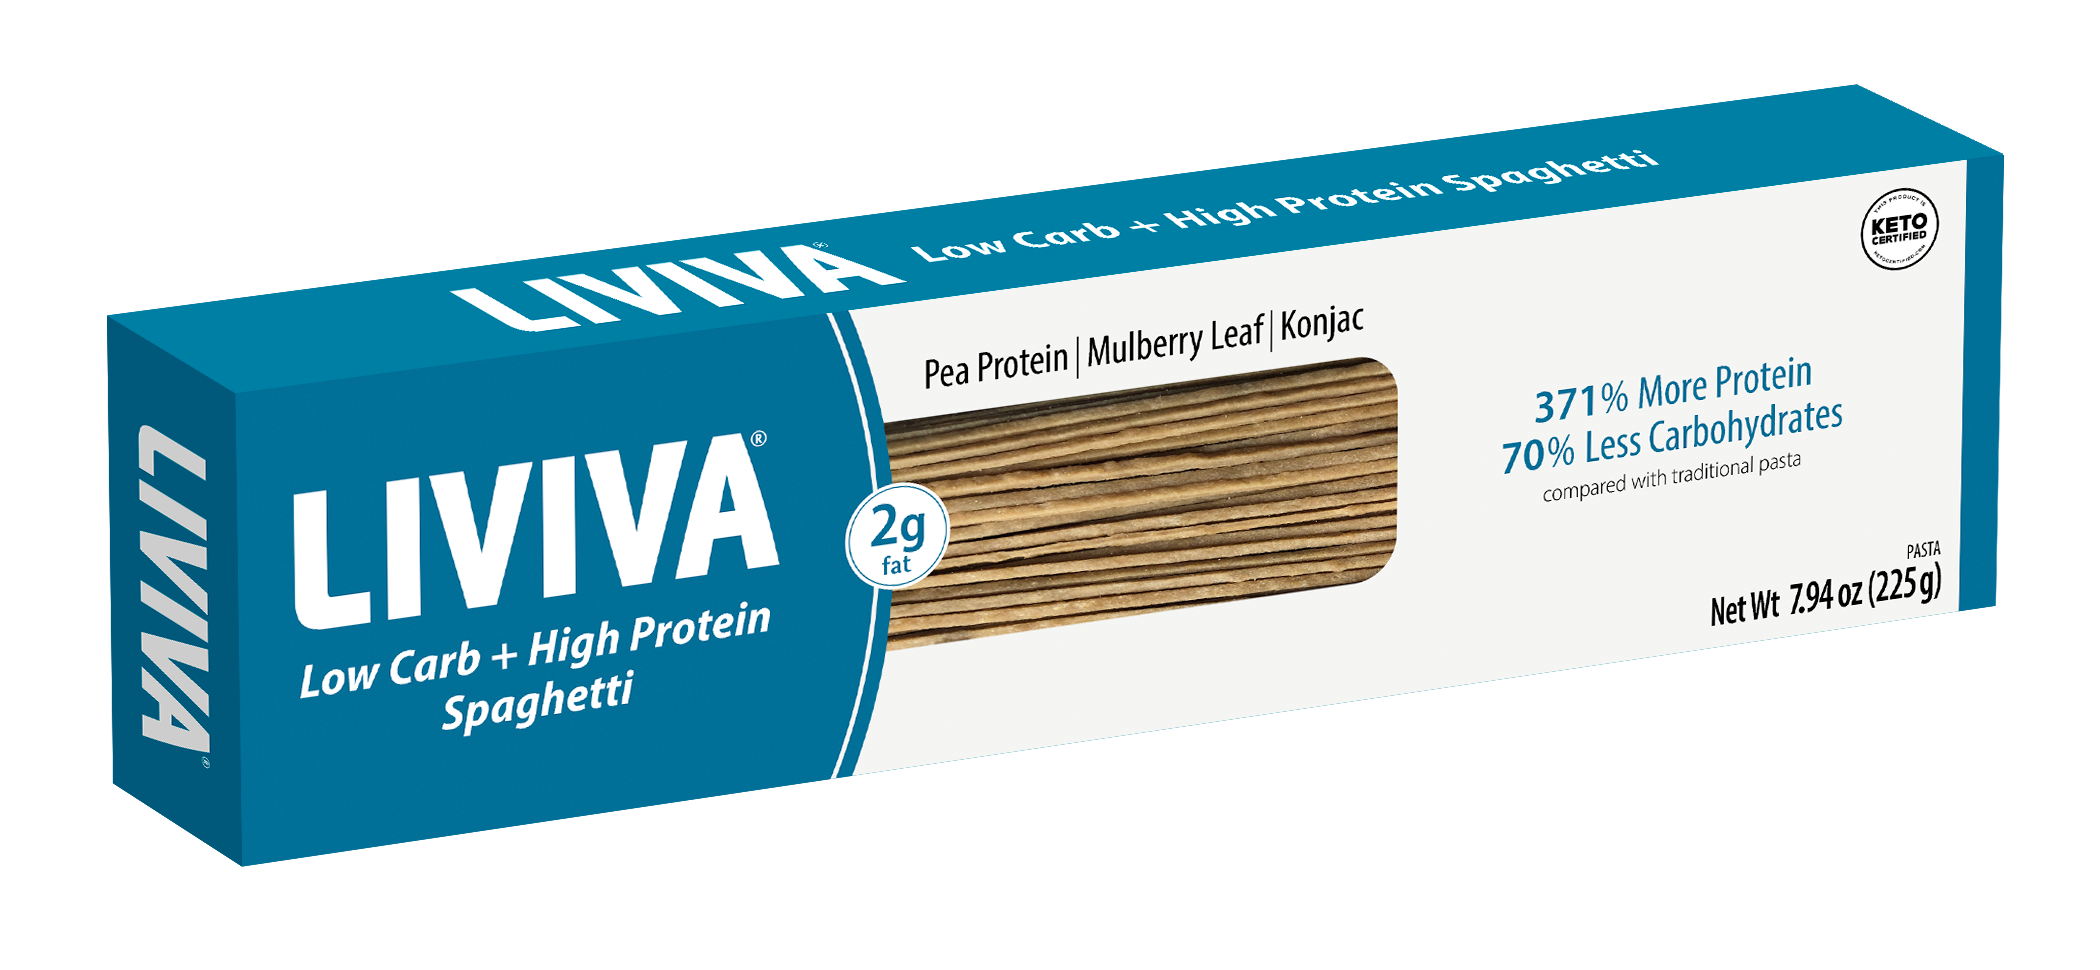 Low Carb High Protein Spaghetti Pasta (Case of 6)